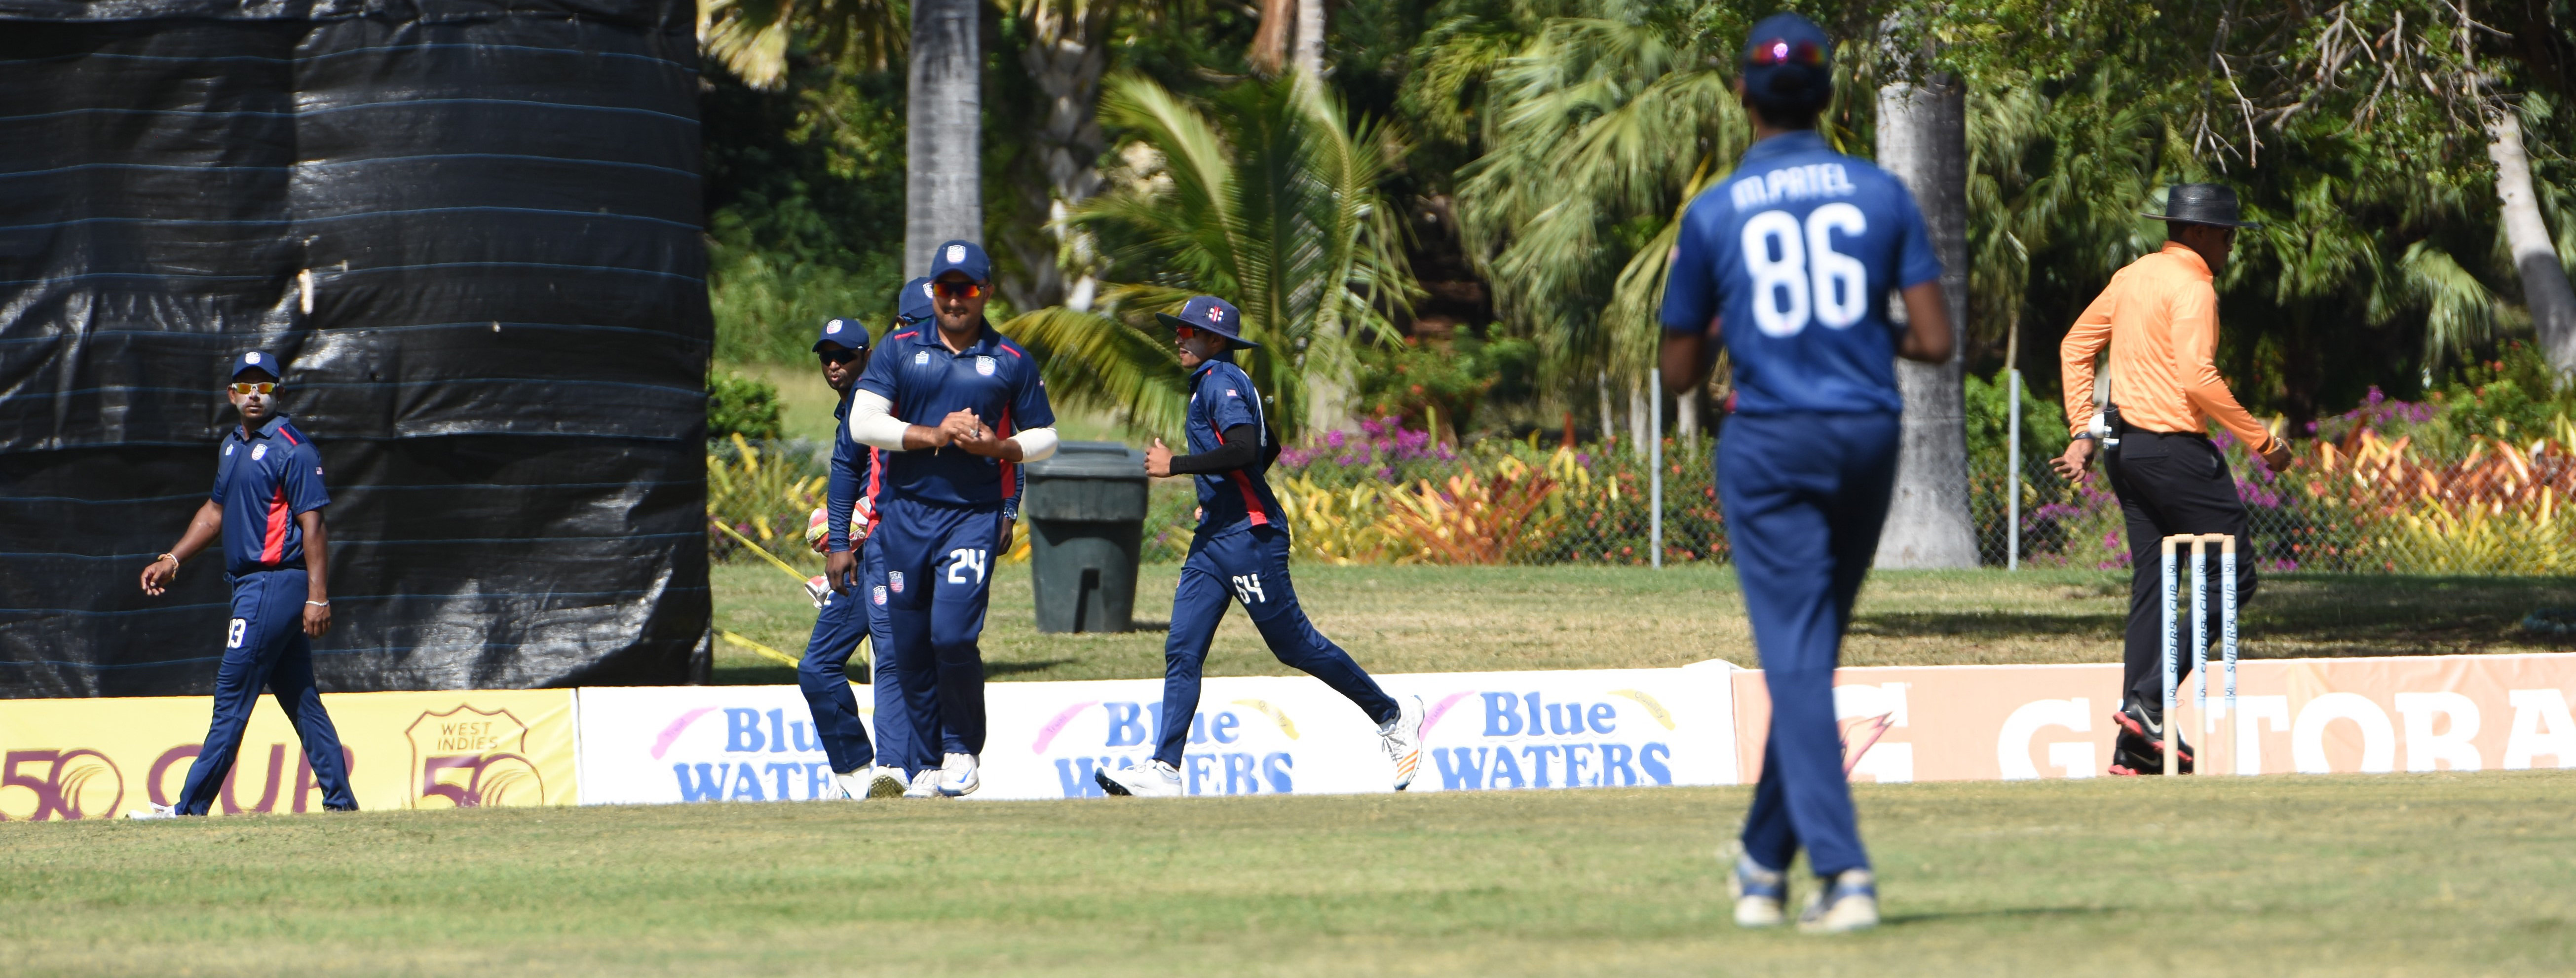 Kent squeeze past USA by 27 runs